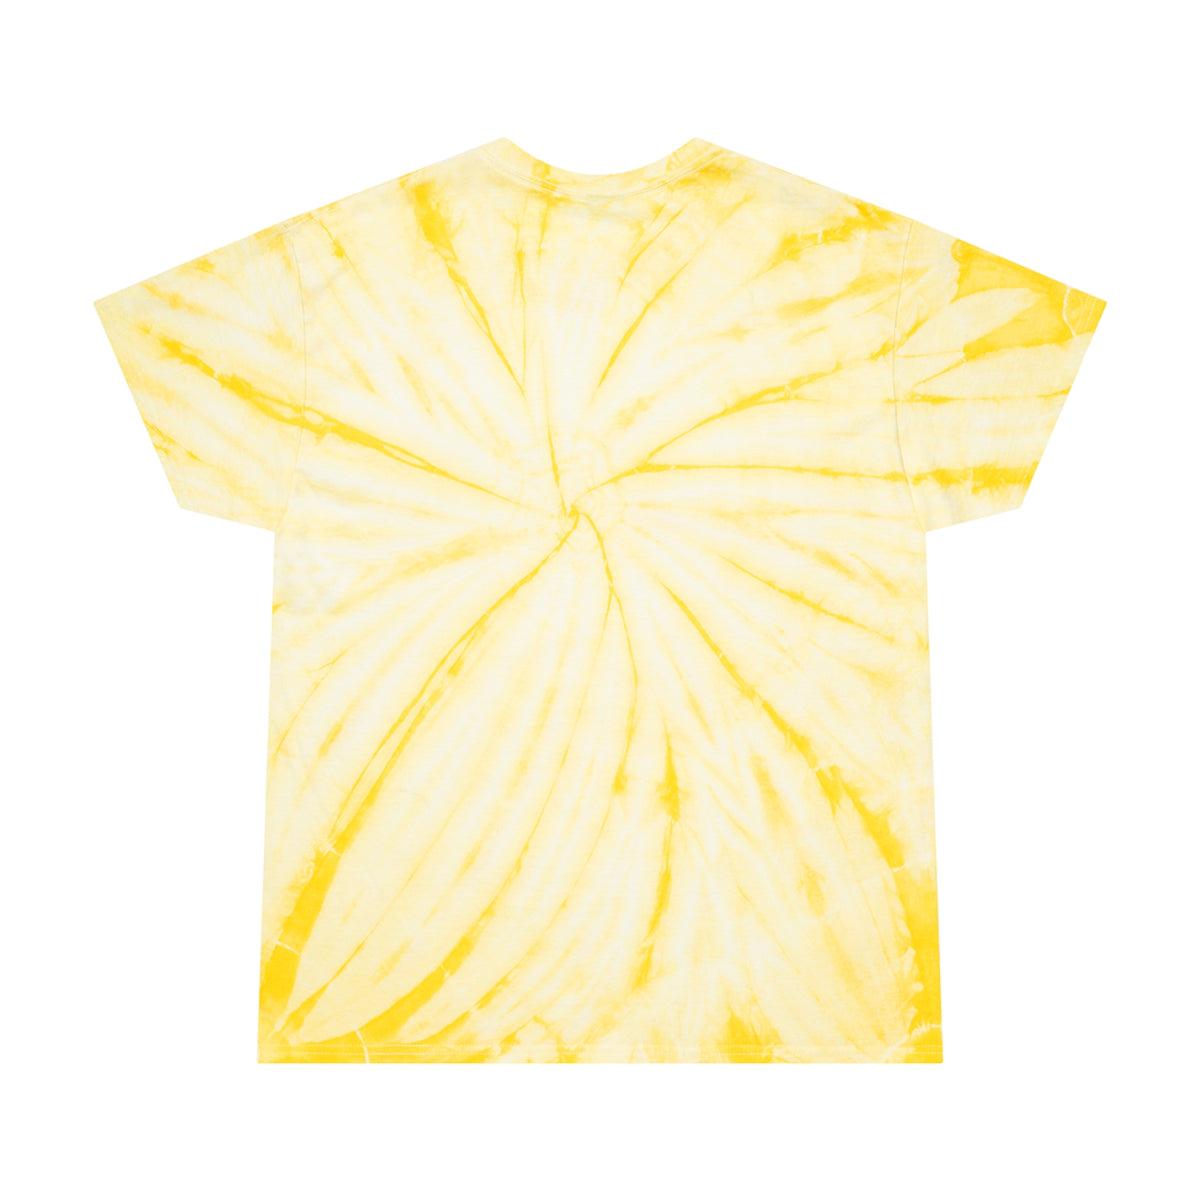 Cancer Cool: The Crab Tie Dye Tee